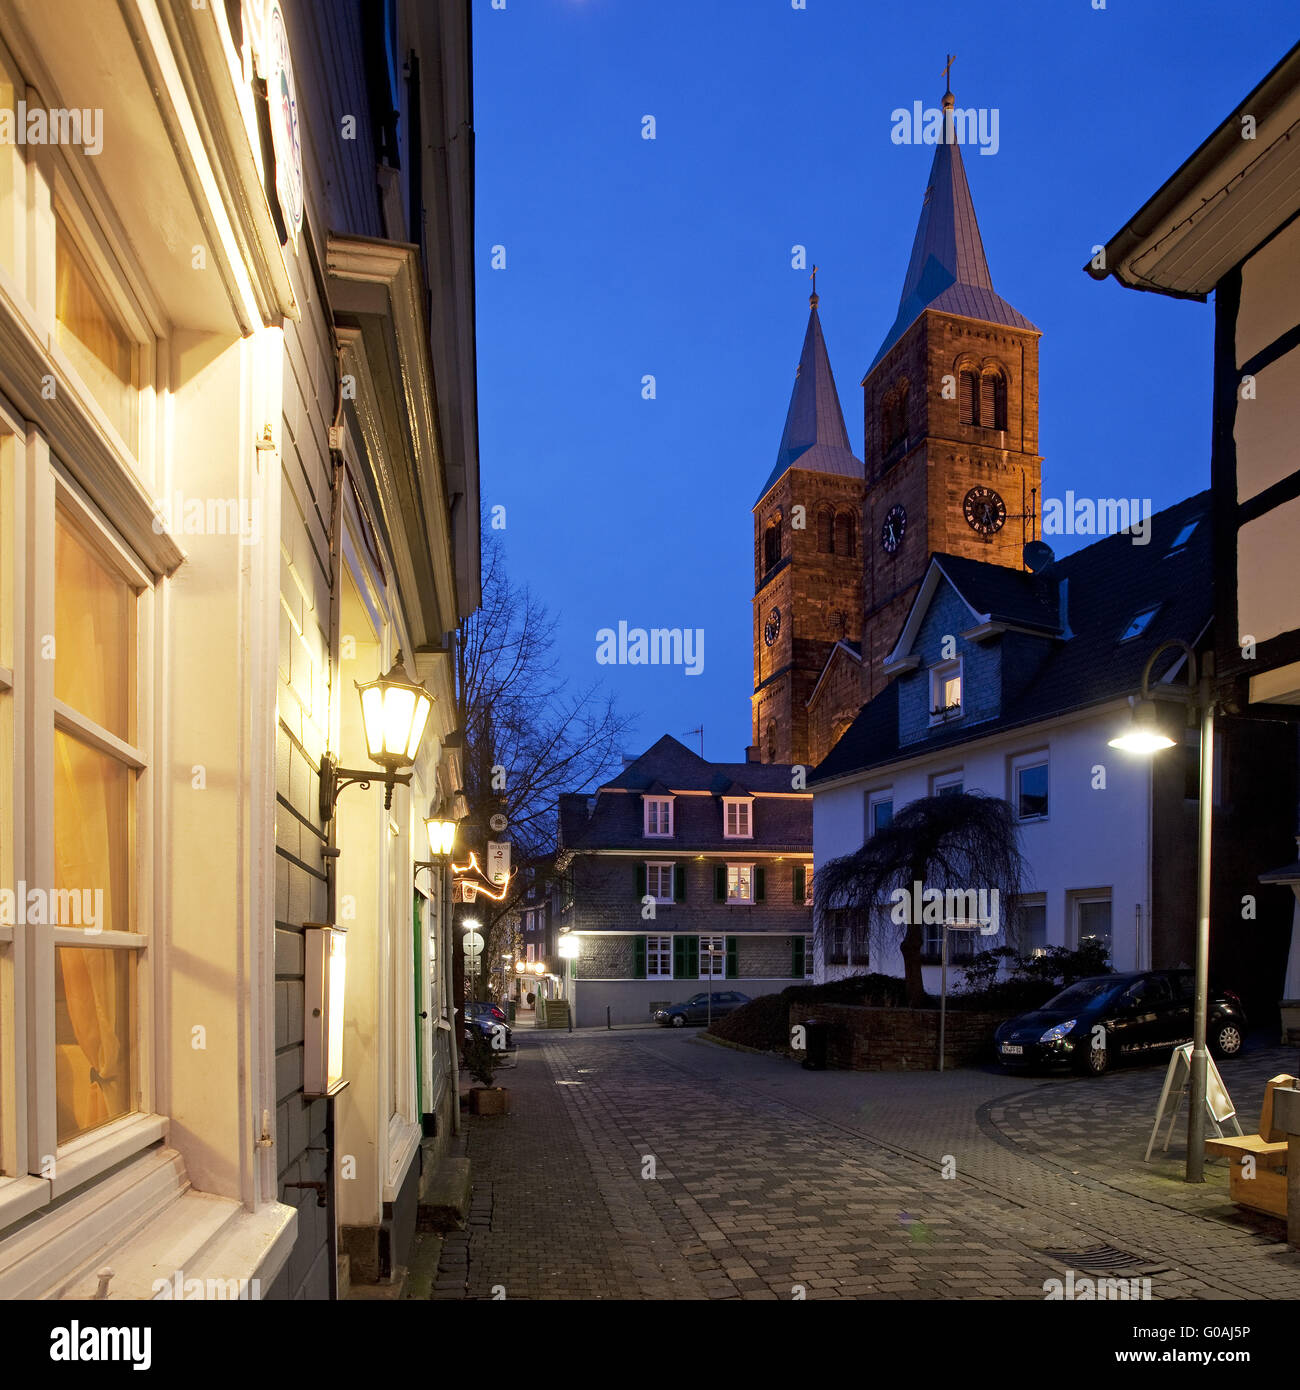 Old Town with St. Mary's Church, Schwelm, Germany. Stock Photo